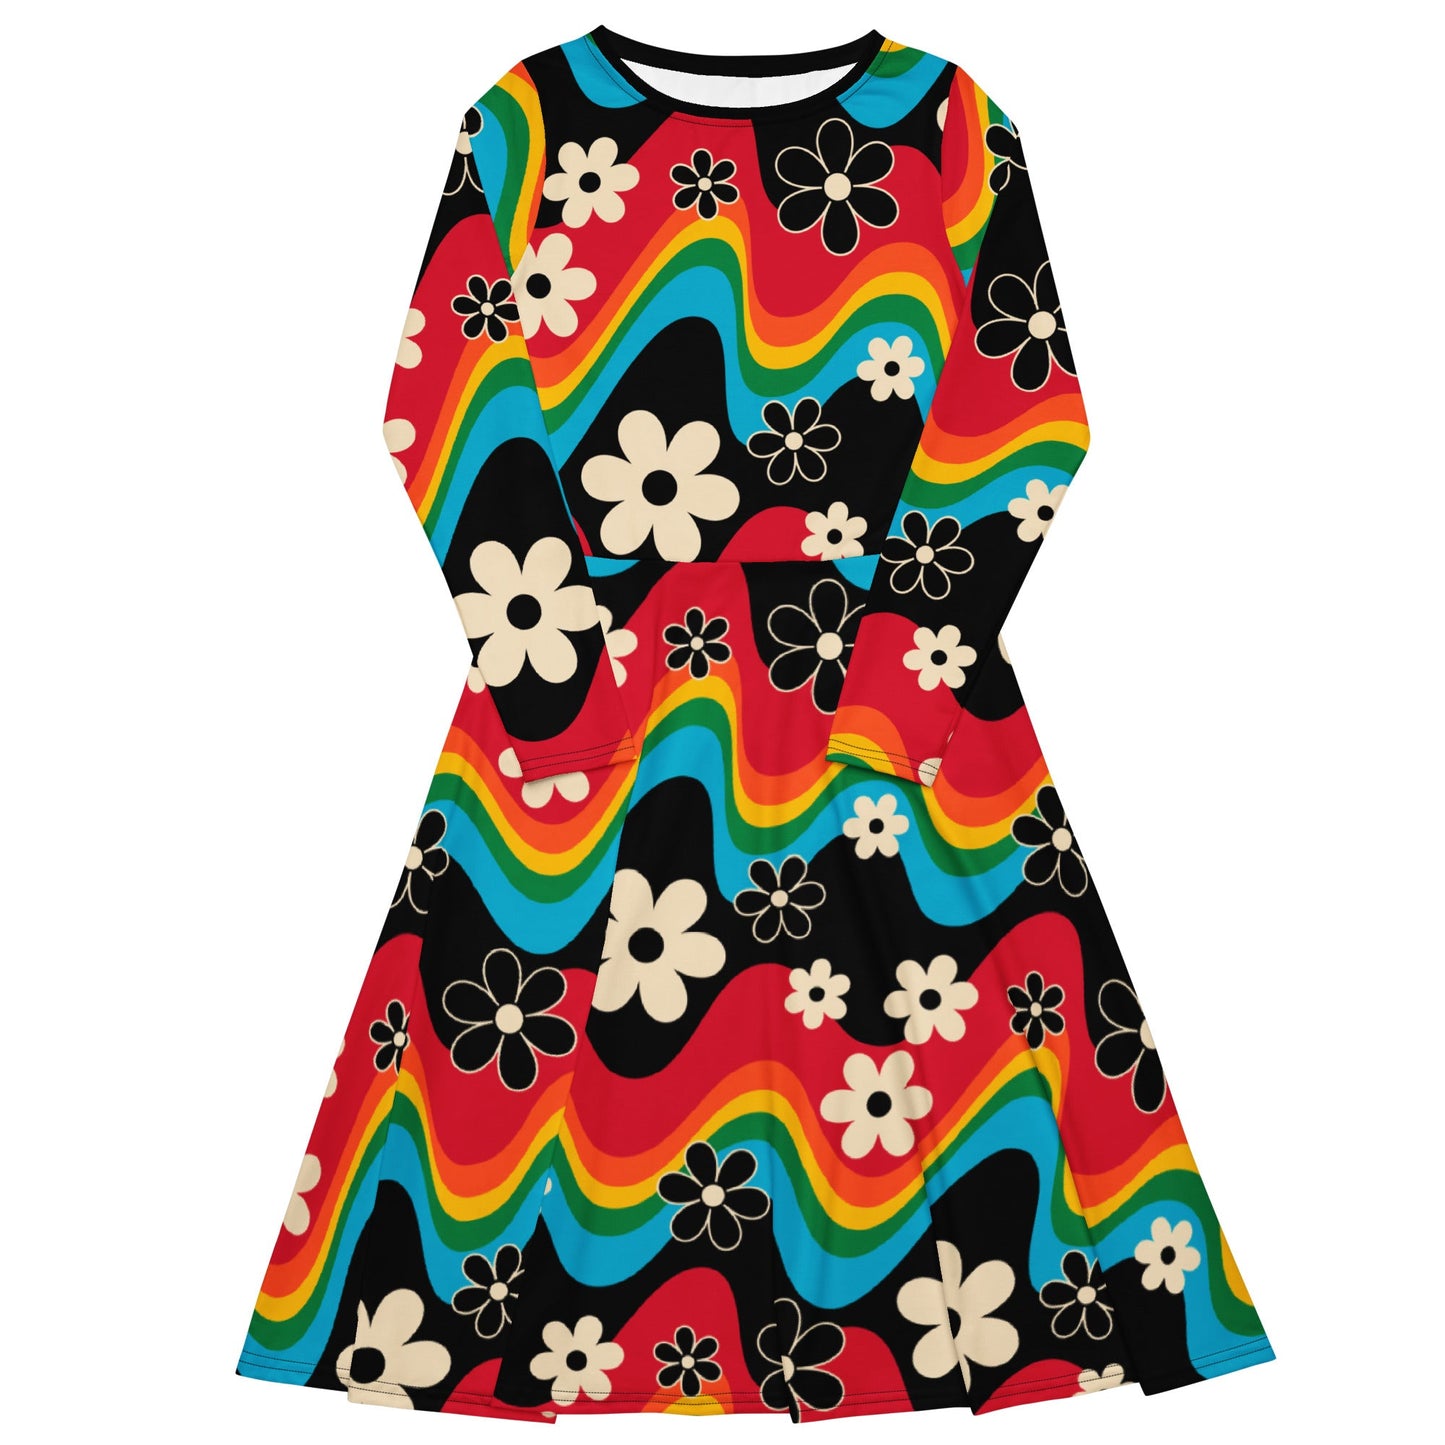 FLORA RAVE - Midi dress with long sleeves and handy pockets